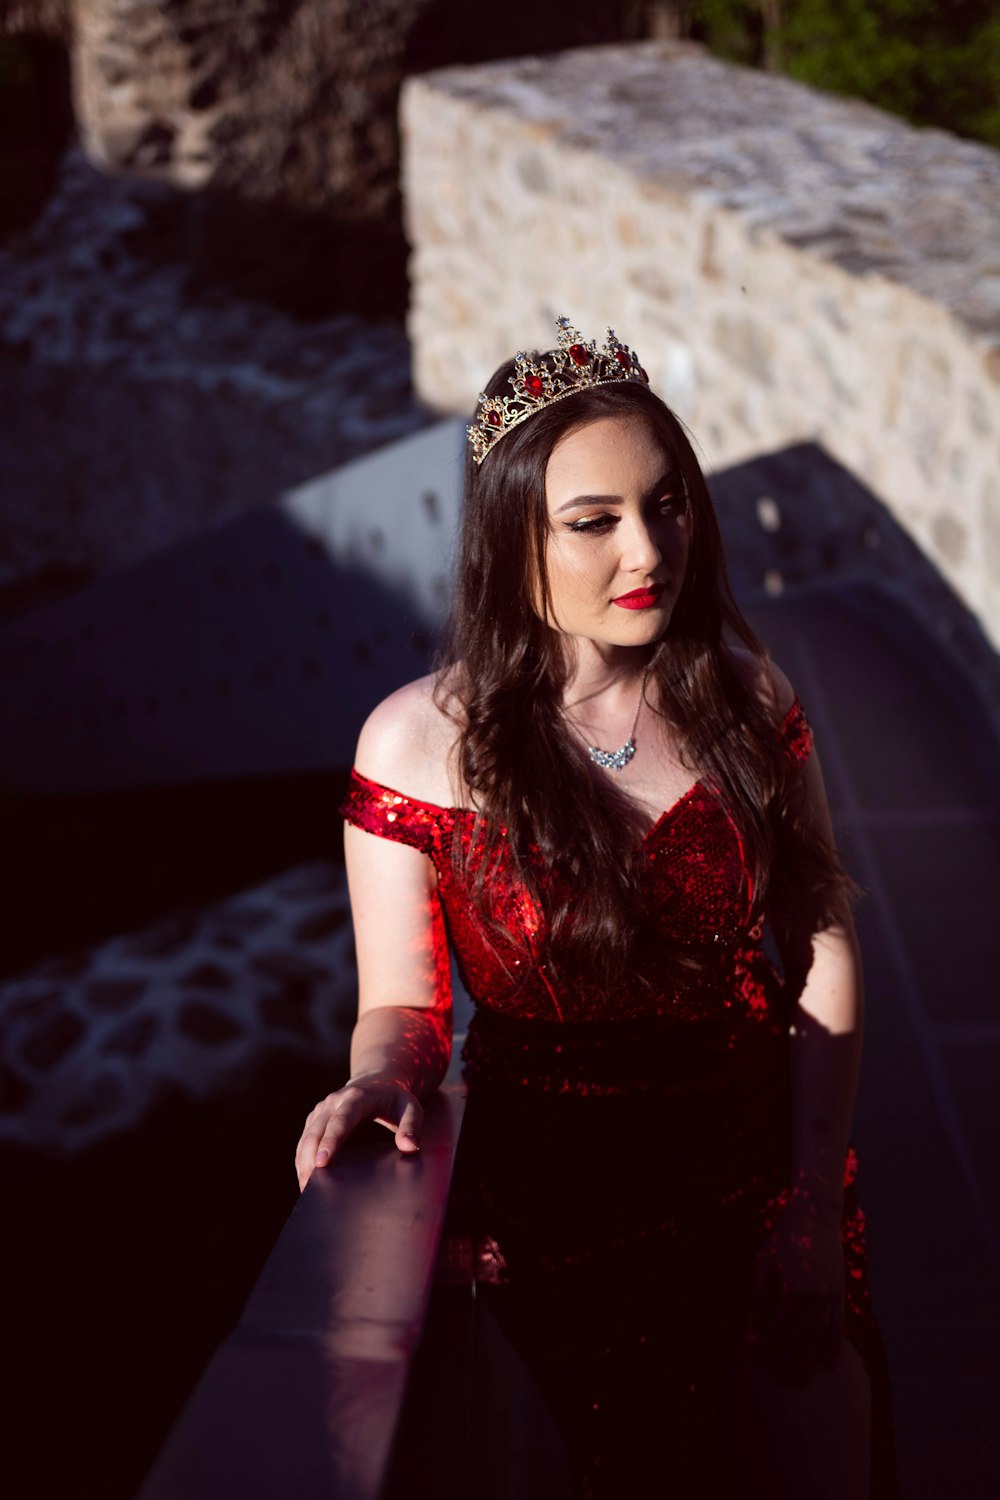 a woman in a red dress and a tiara